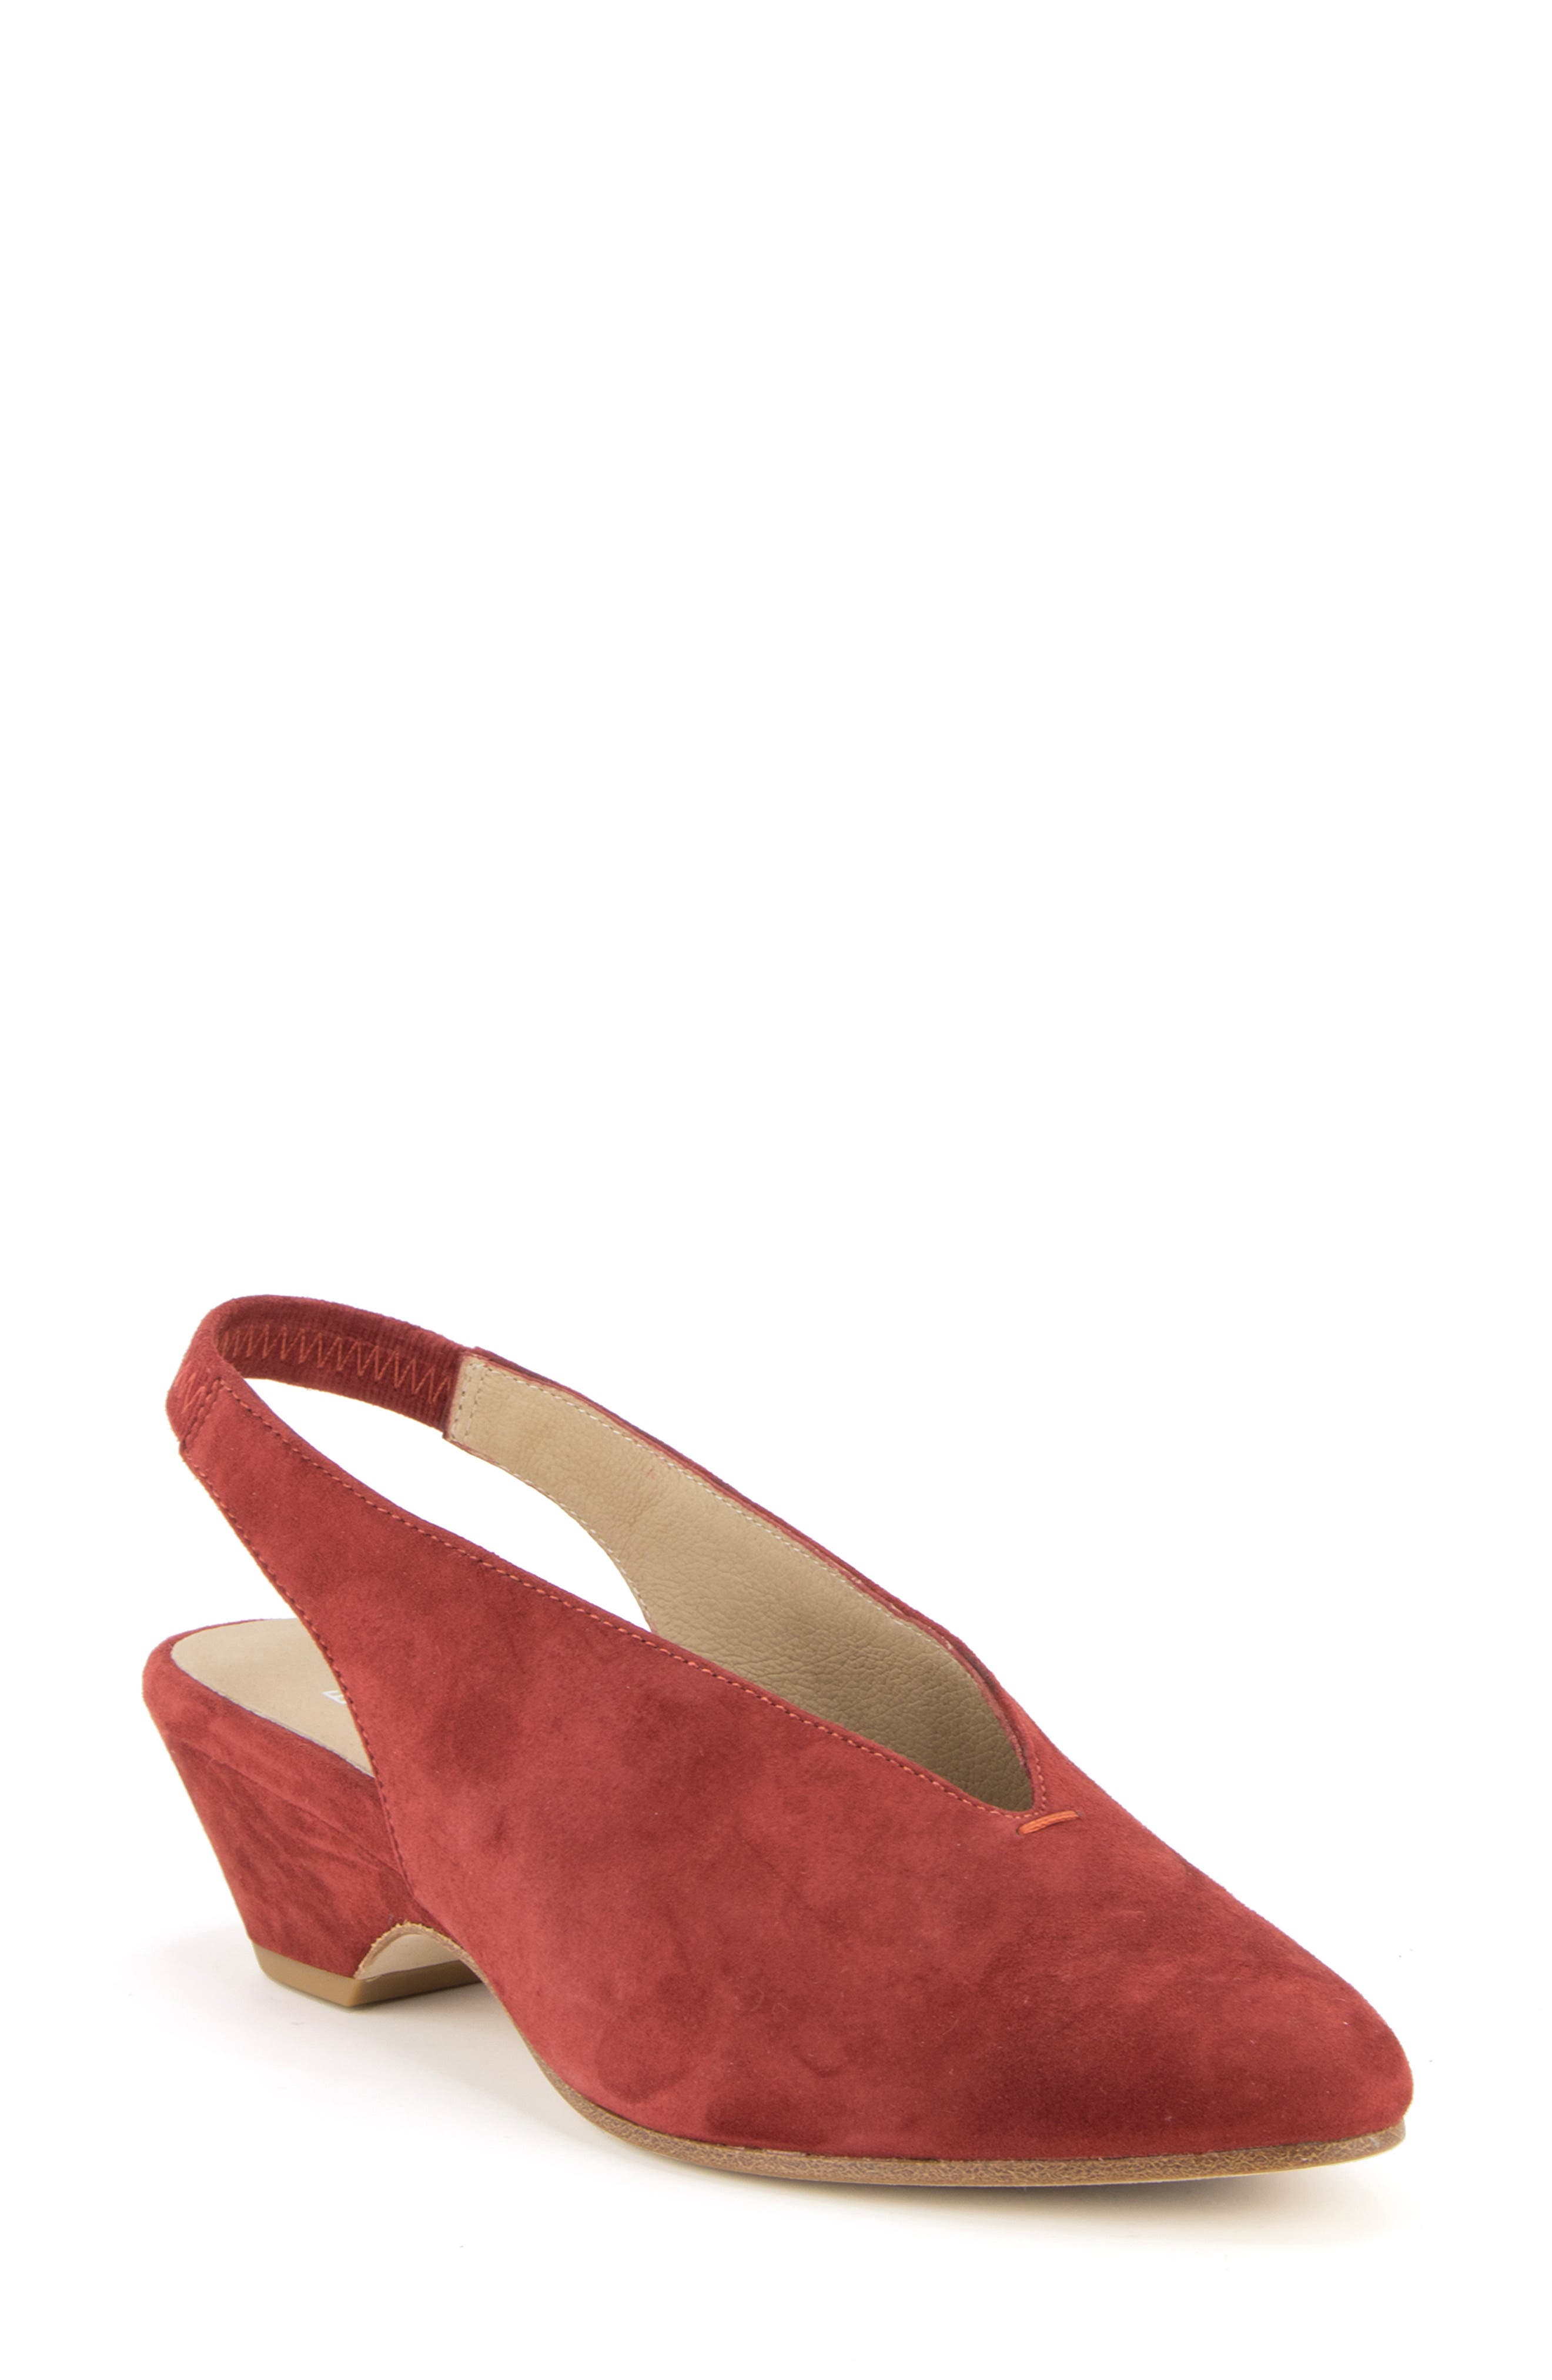 eileen fisher red shoes